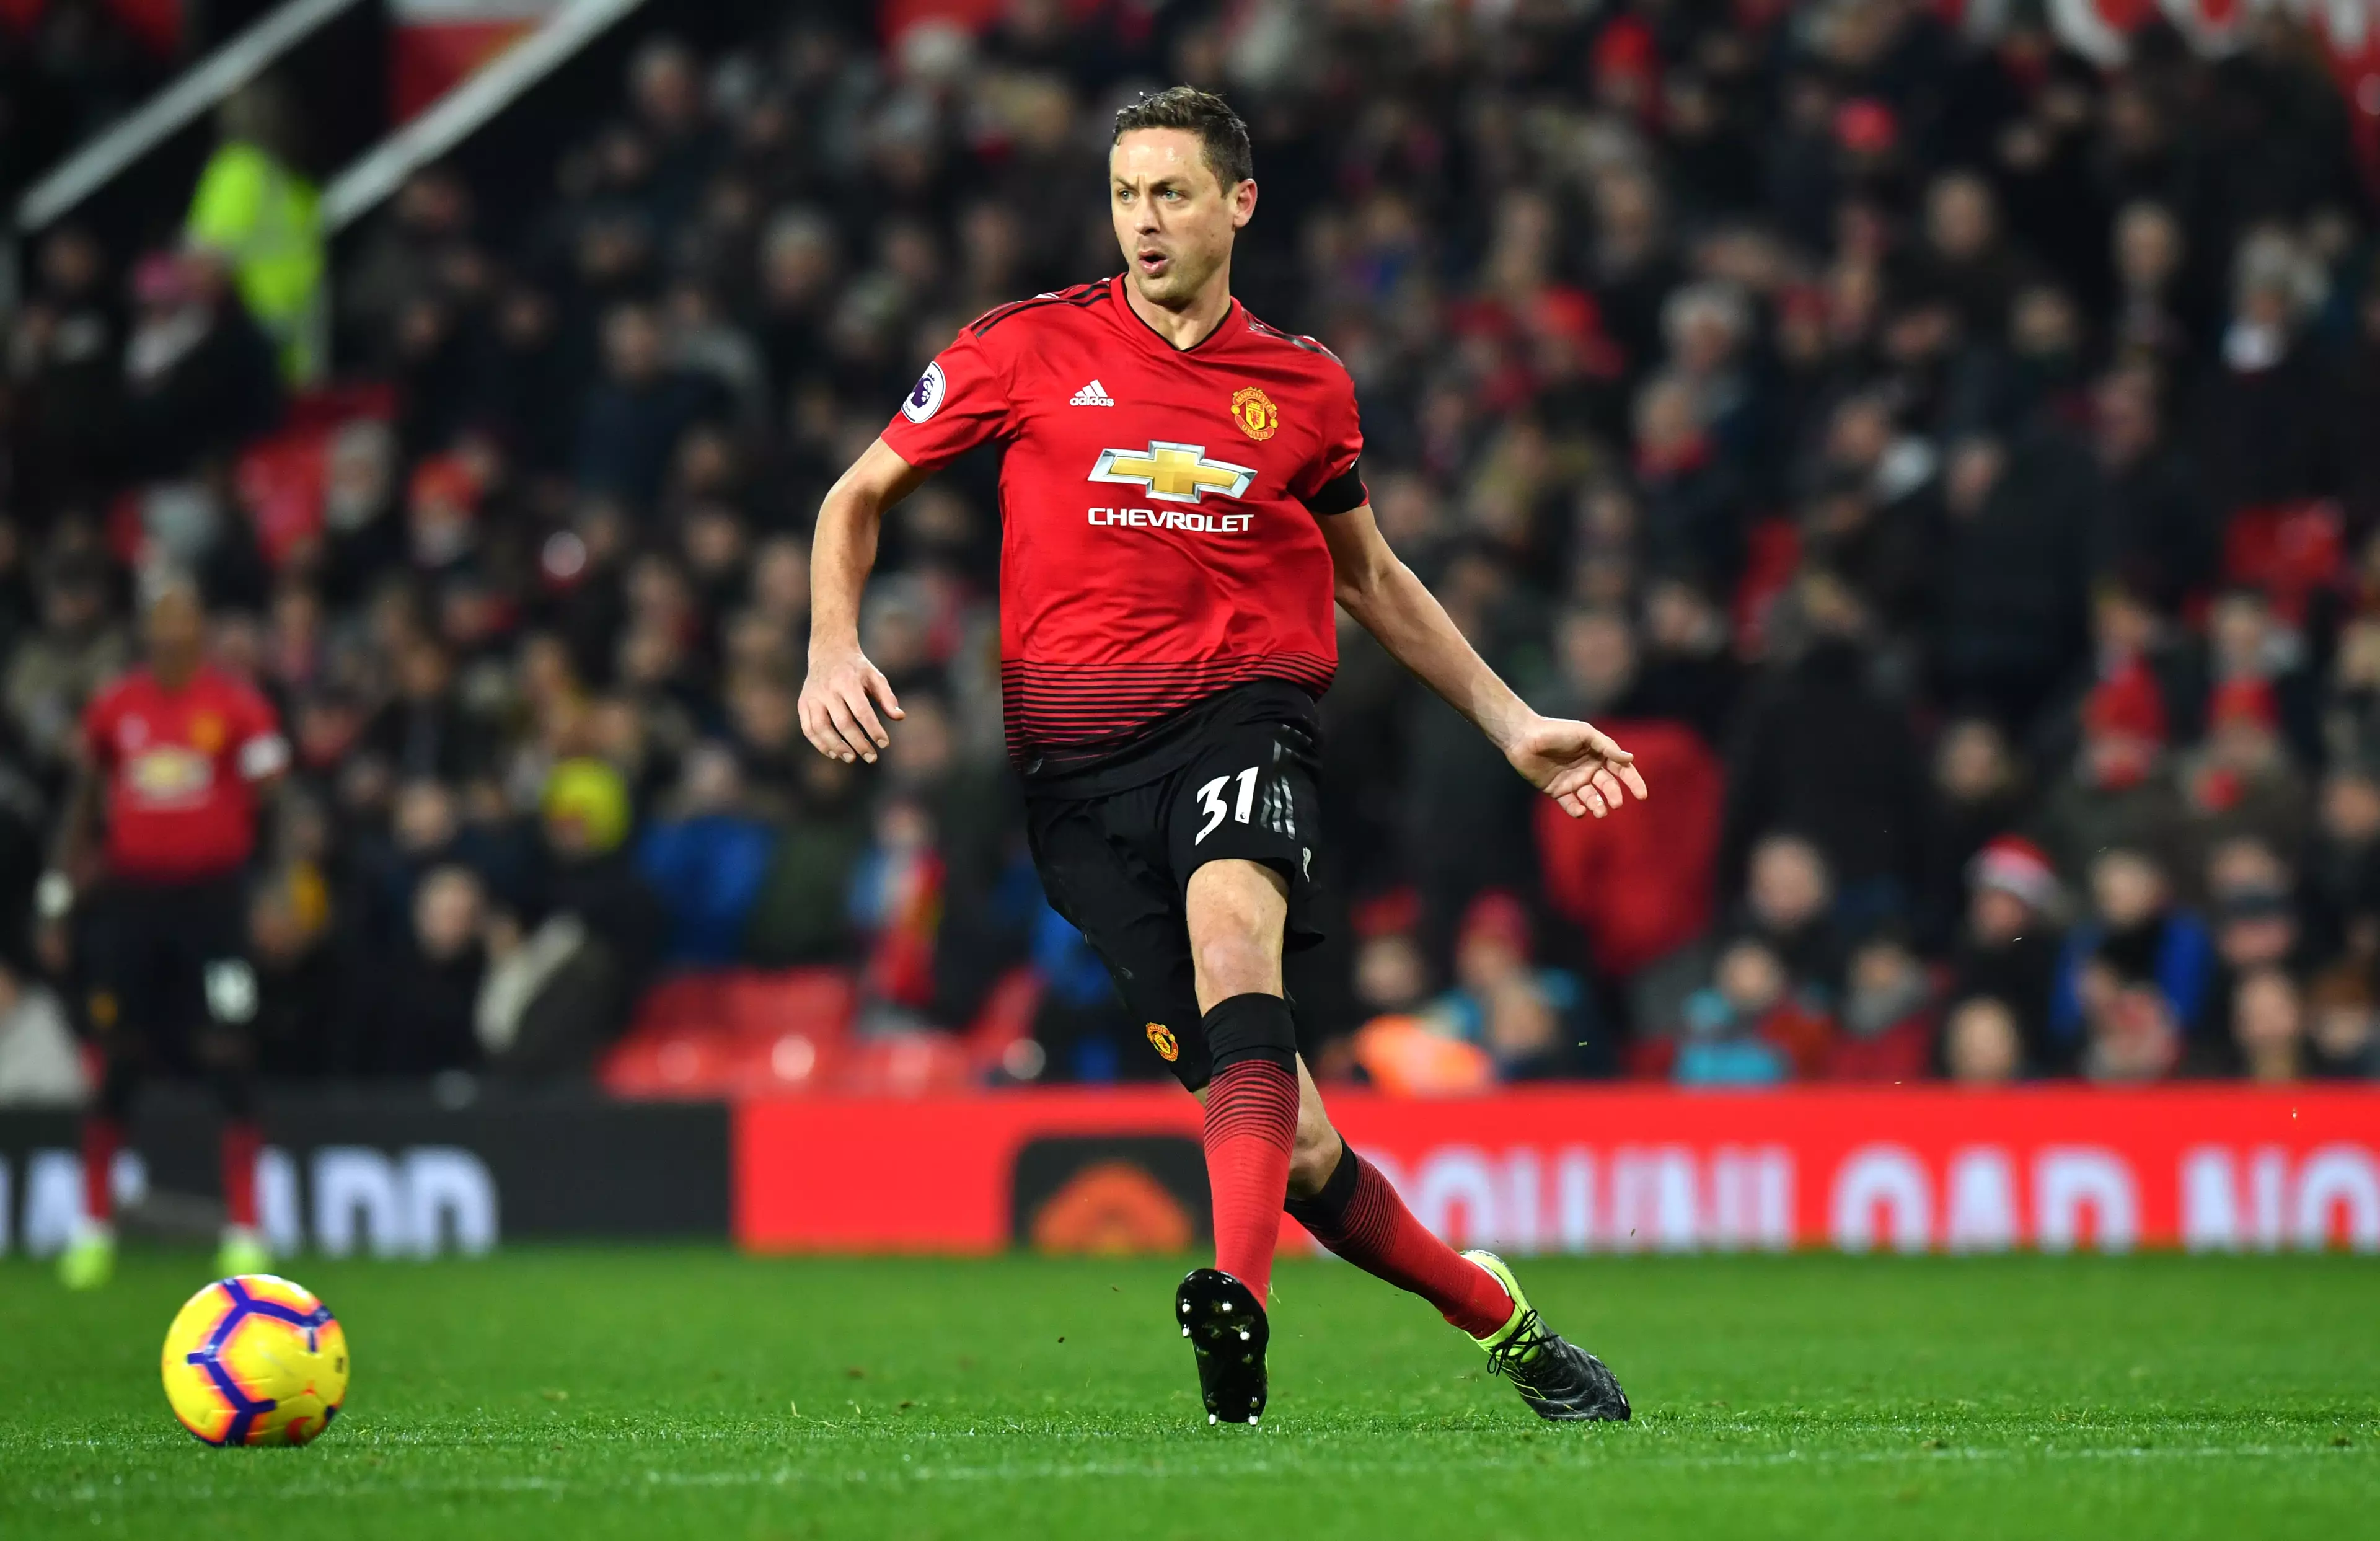 Matic could move on after just two years at Old Trafford. Image: PA Images